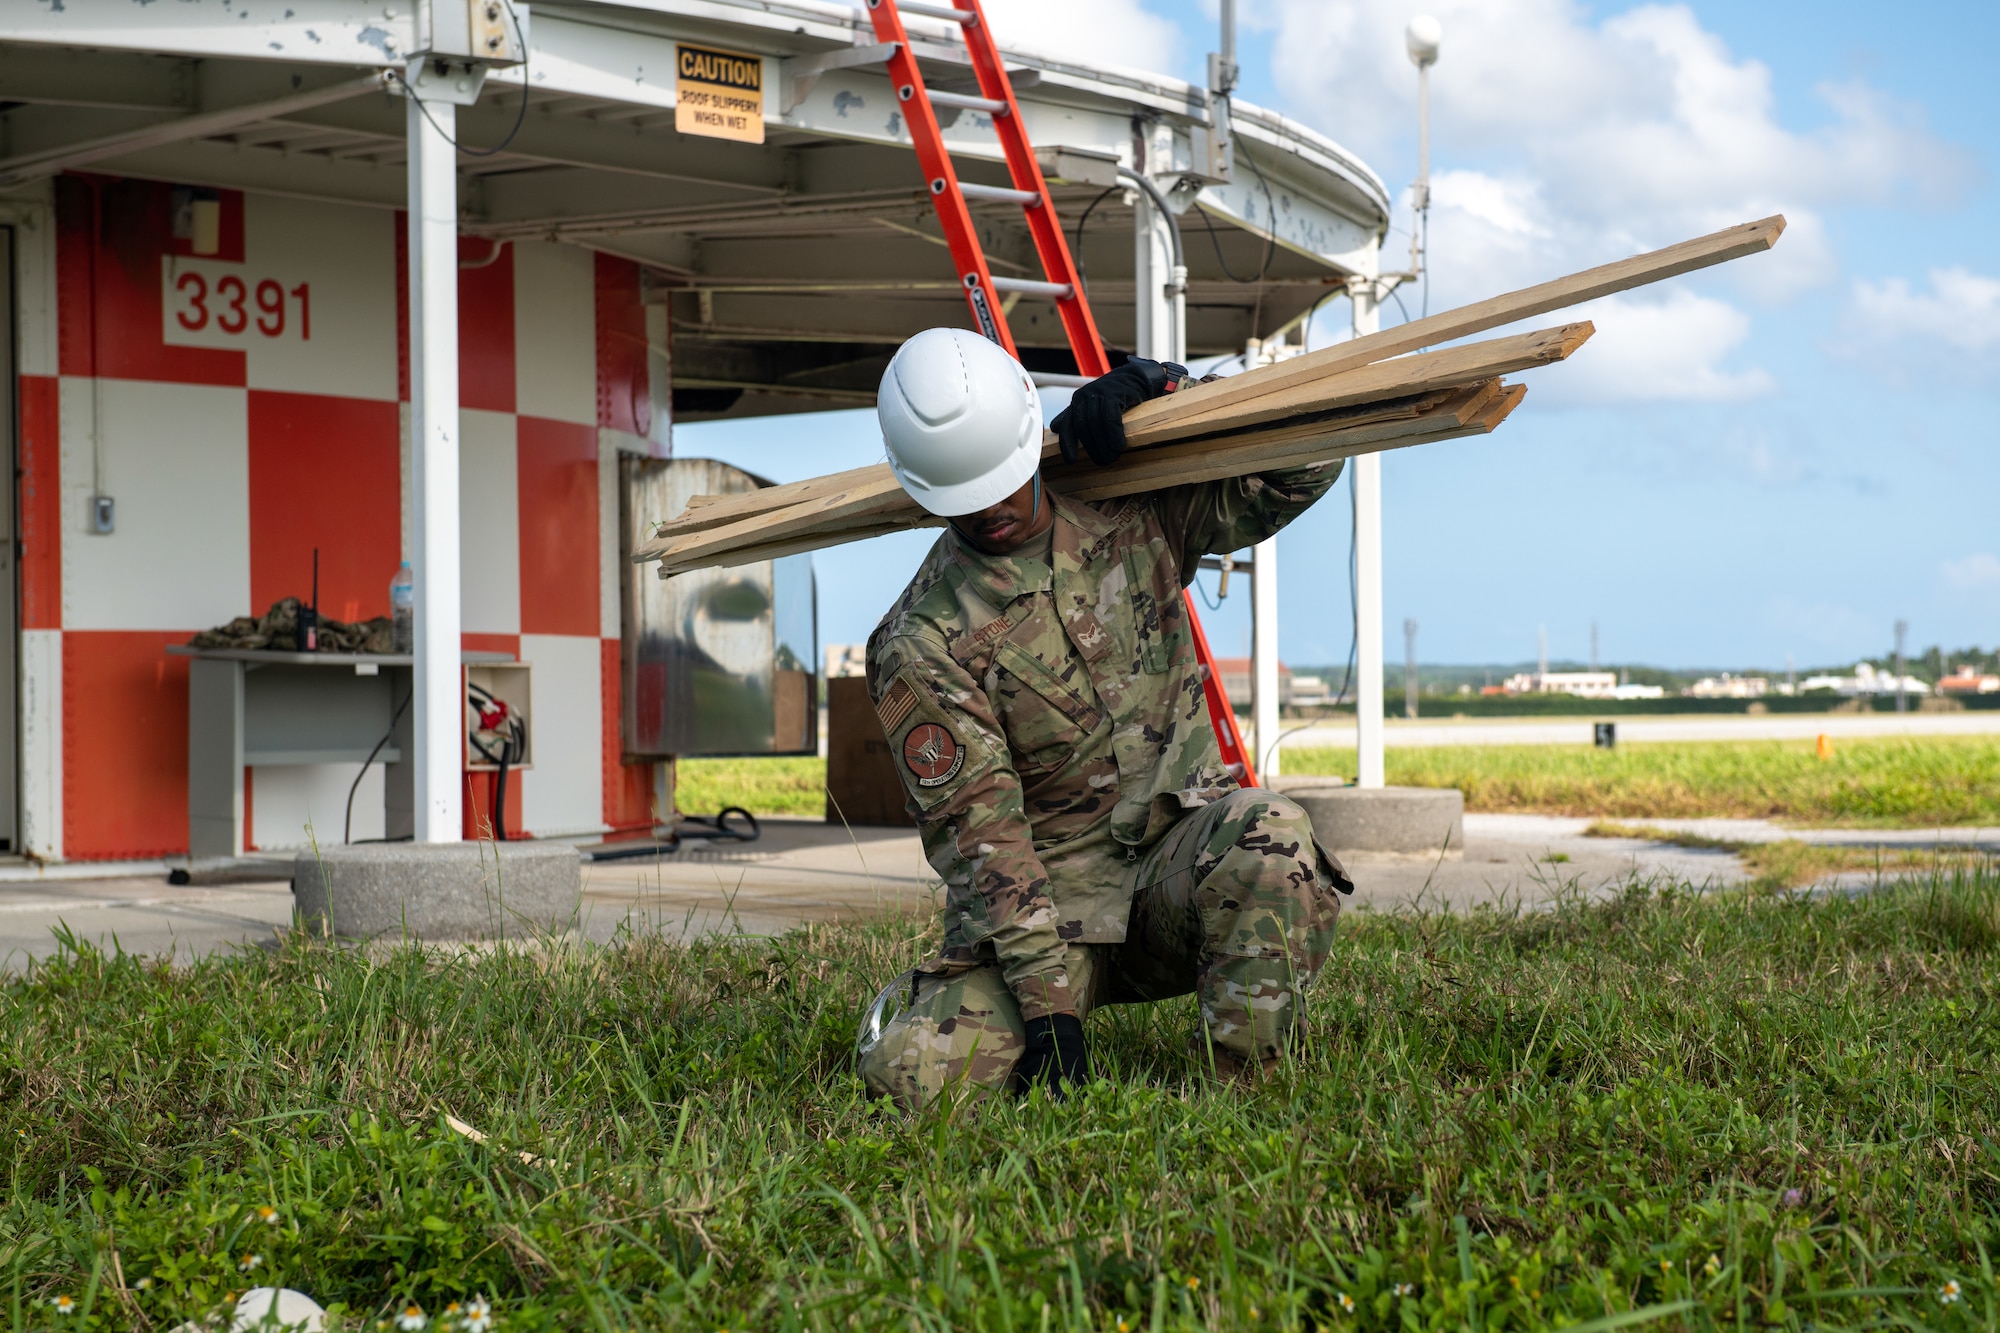 An Airman picks up wooden planks in front of an orange and white building